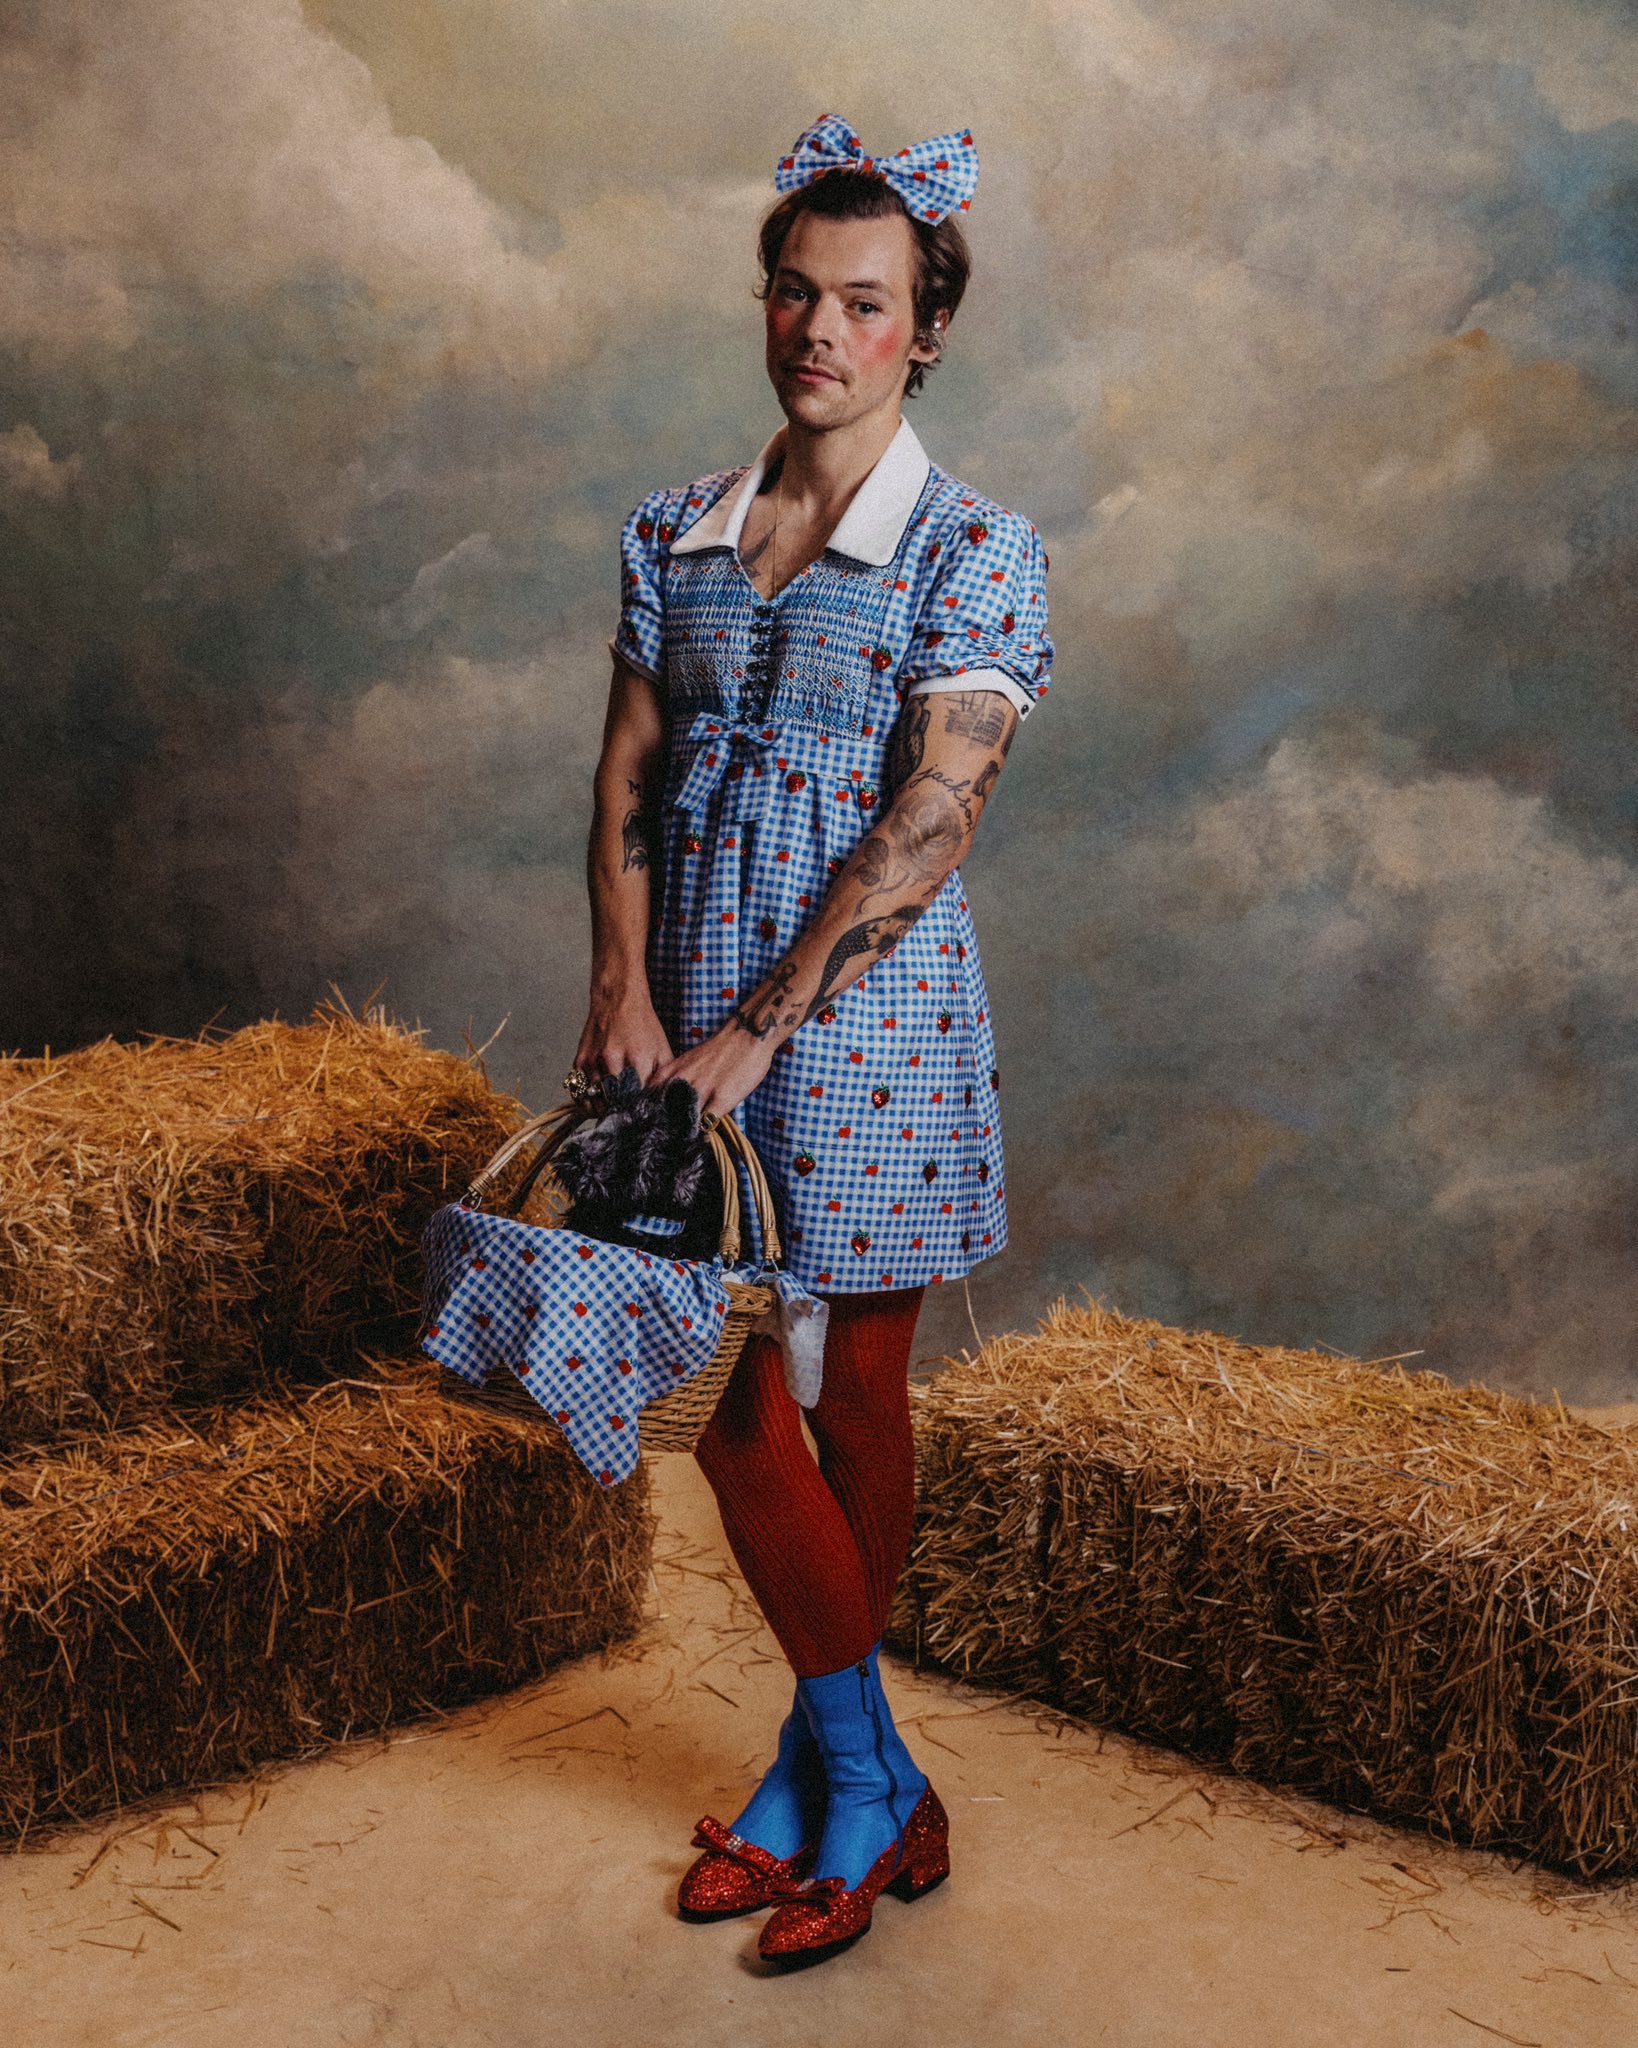 LOOK: Harry Styles is Dorothy from ‘The Wonderful Wizard of Oz’